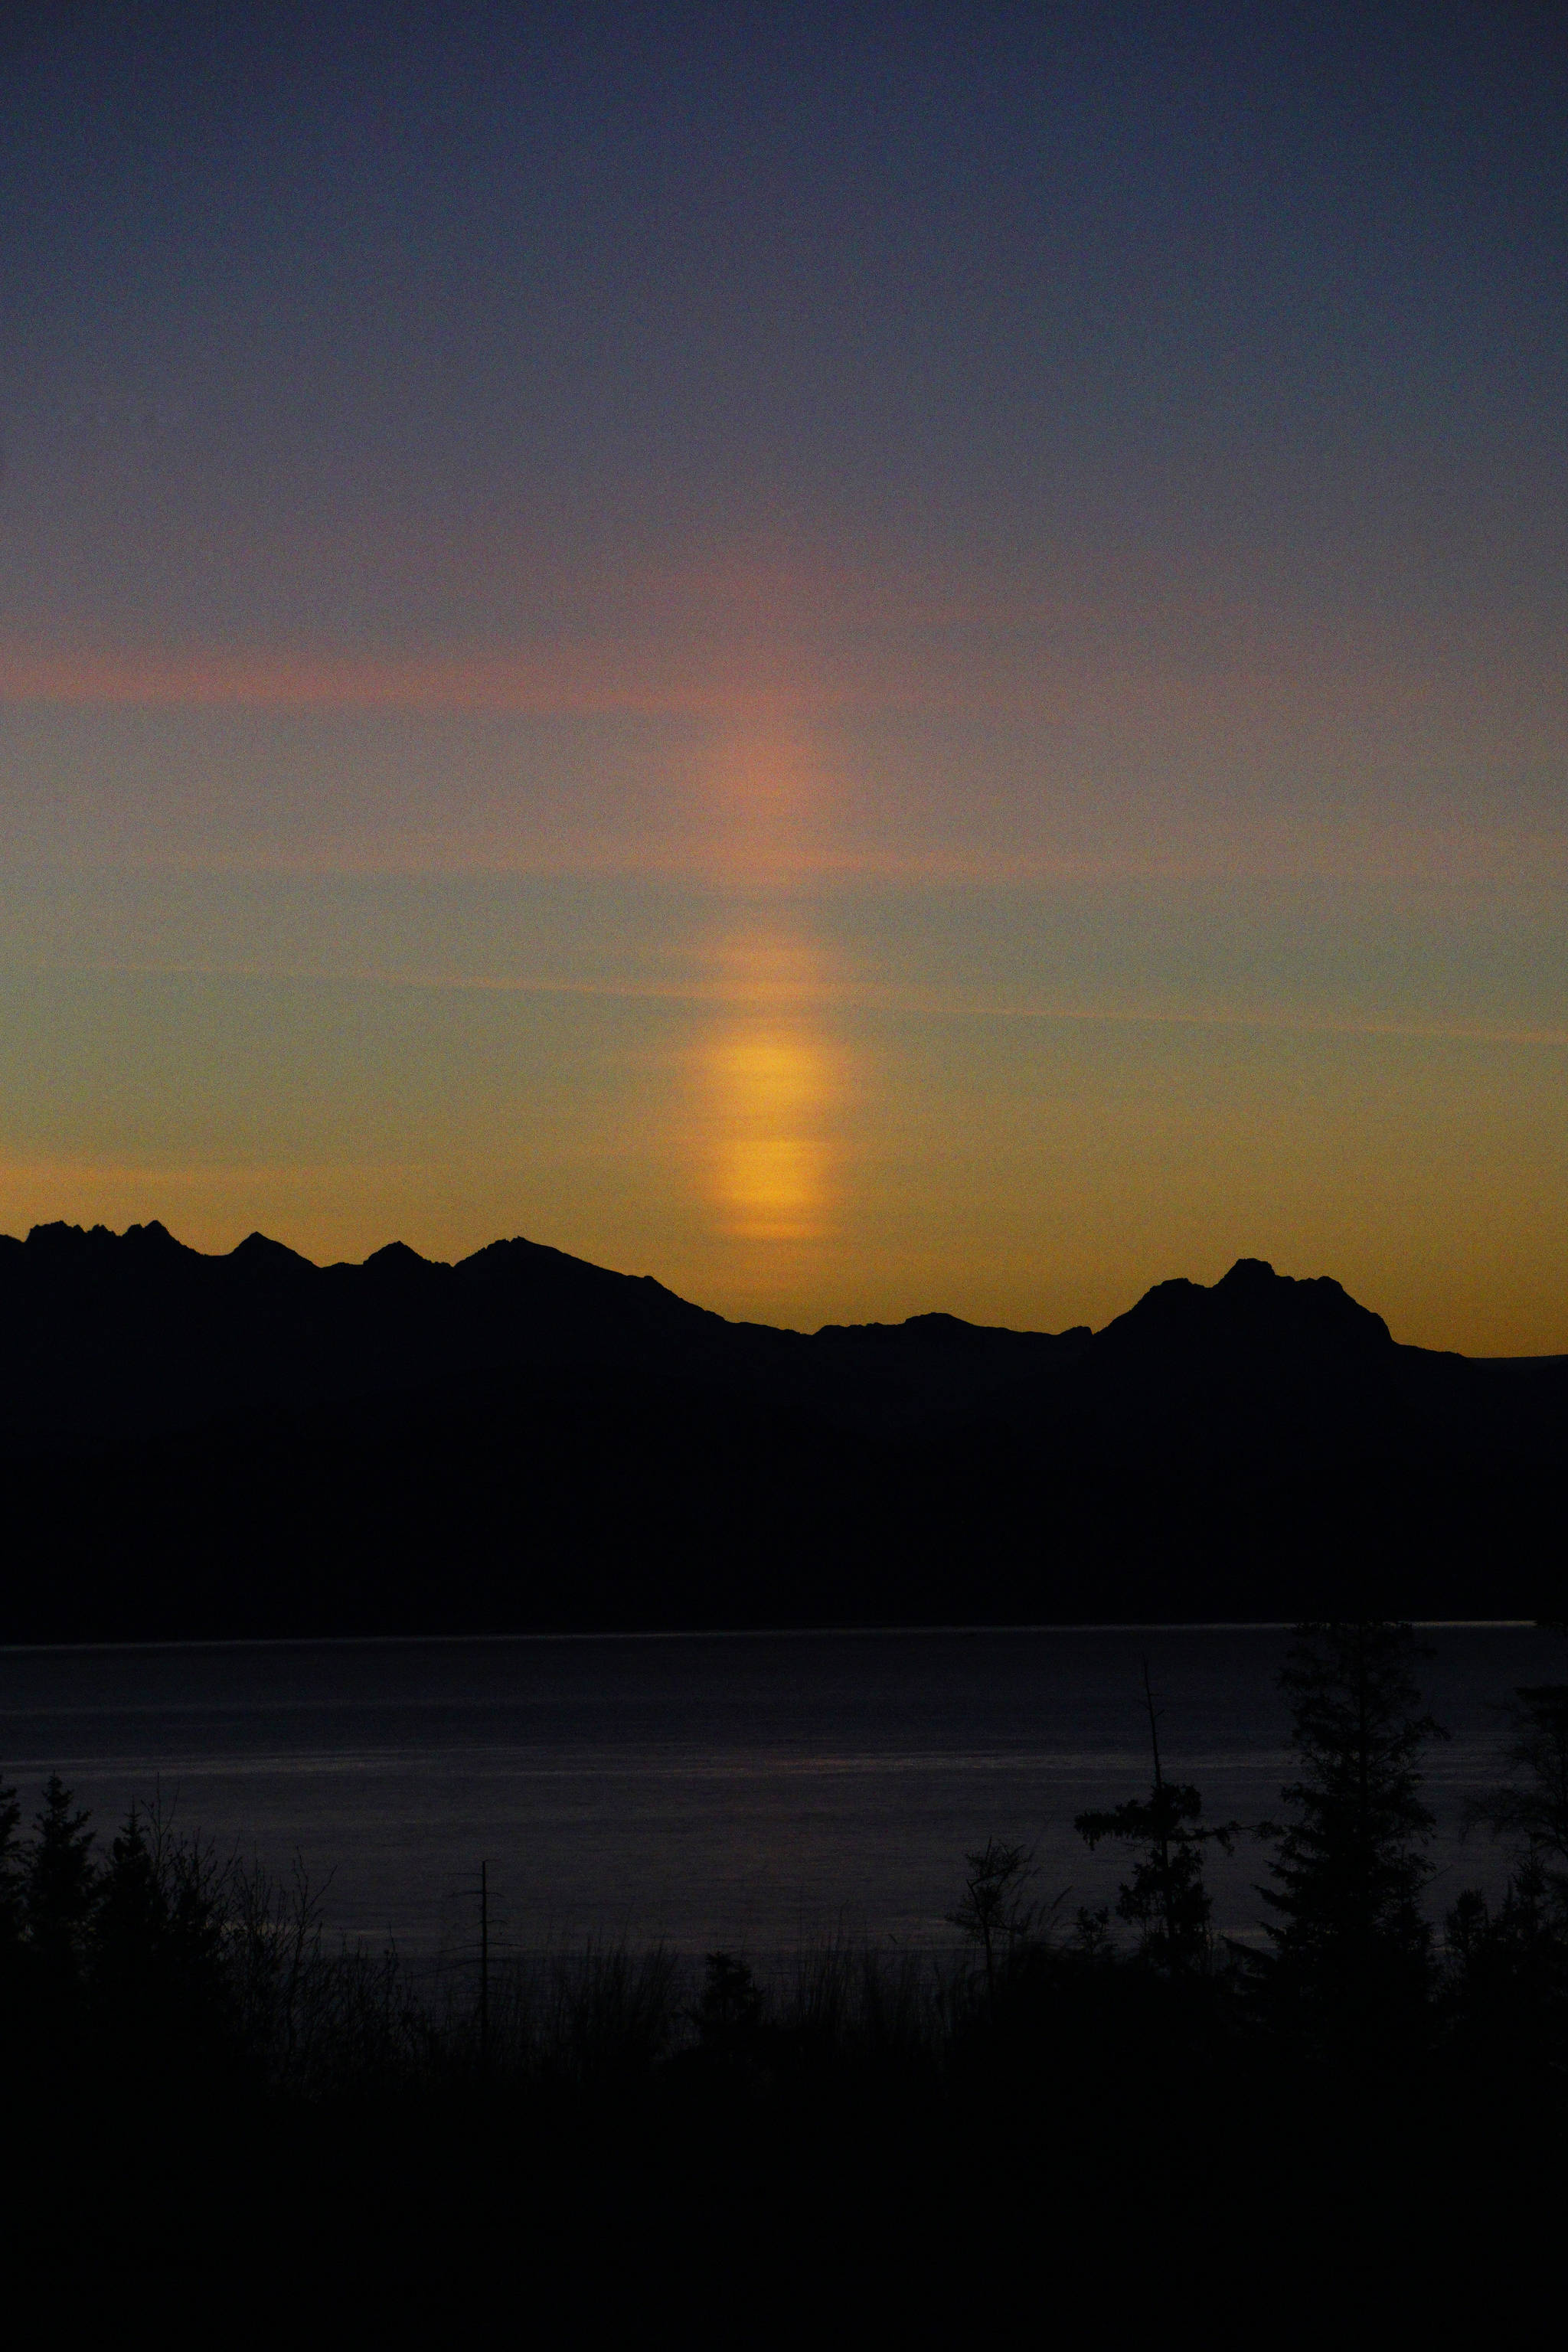 A sun pillar appears over the Kenai Mountains at sunrise about 9:20 a.m. Friday, Jan. 18, 2019, in Homer, Alaska. A sun pillar forms when light from the rising or setting sun is reflected by ice crystals in thin, high-level clouds. (Photo by Michael Armstrong/Homer News)